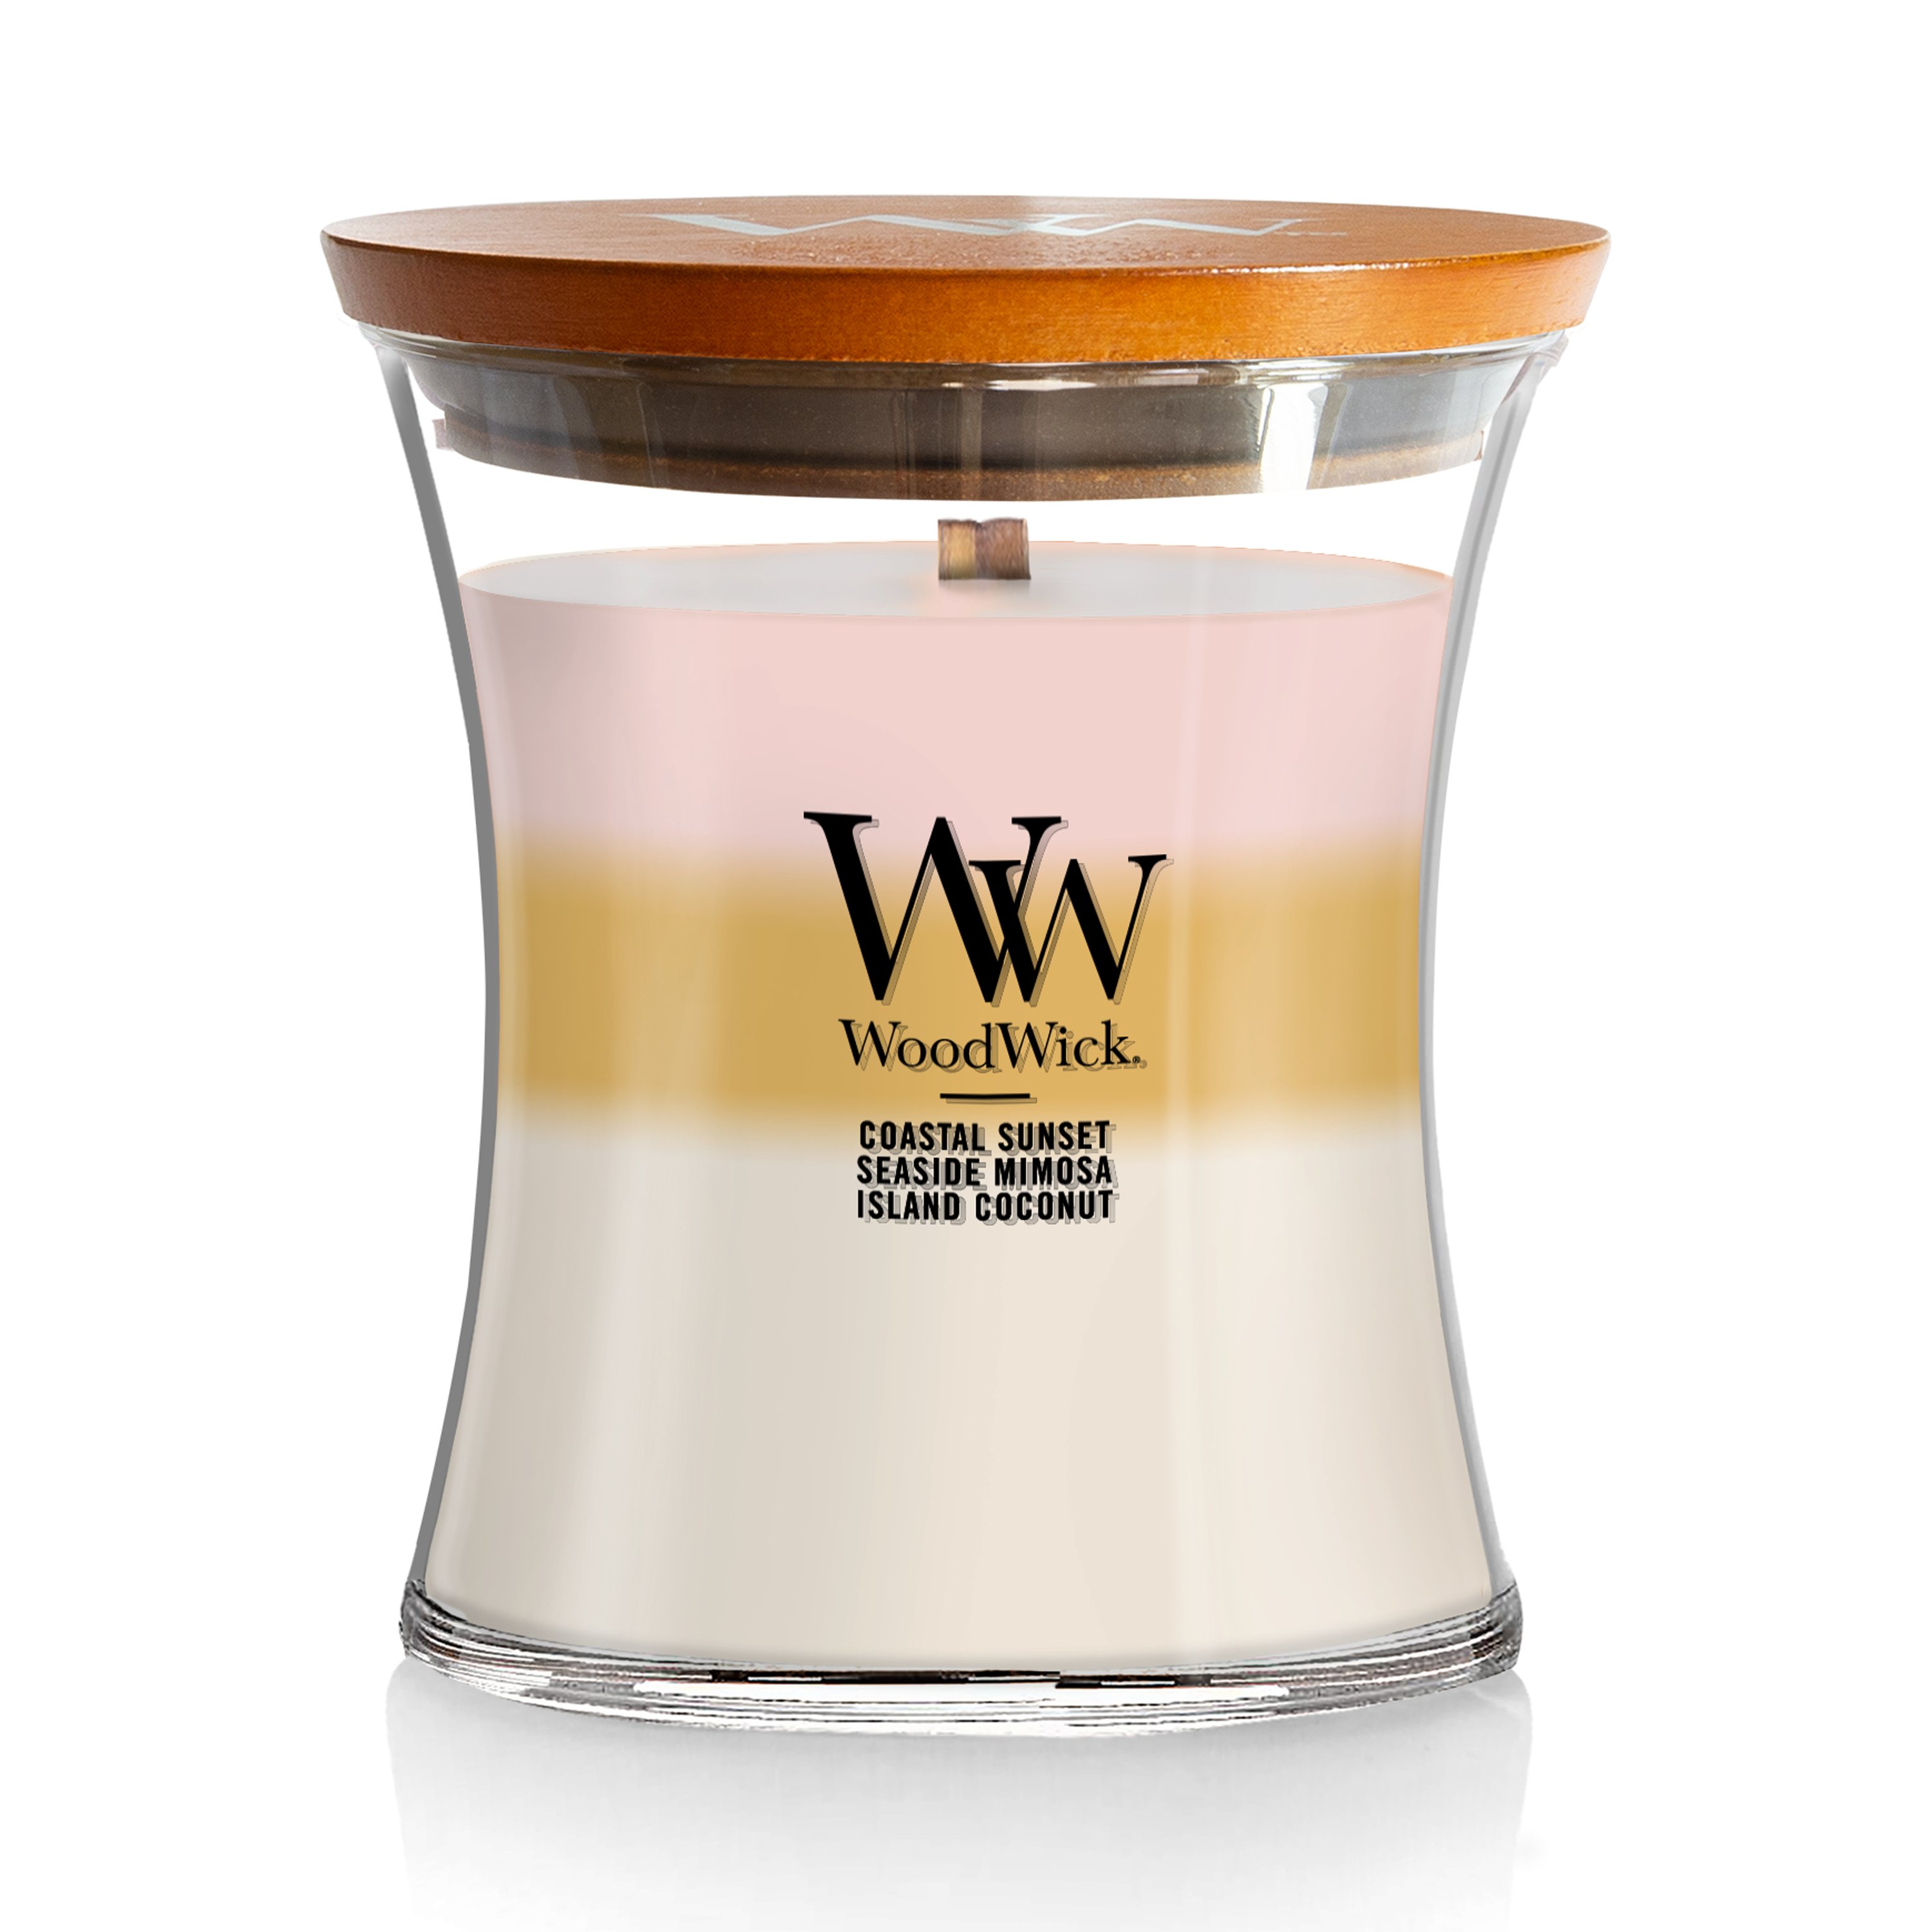 WoodWick Medium Hourglass Candle, Island Coconut - Premium Soy Blend Wax,  Pluswick Innovation Wood Wick, Made in USA